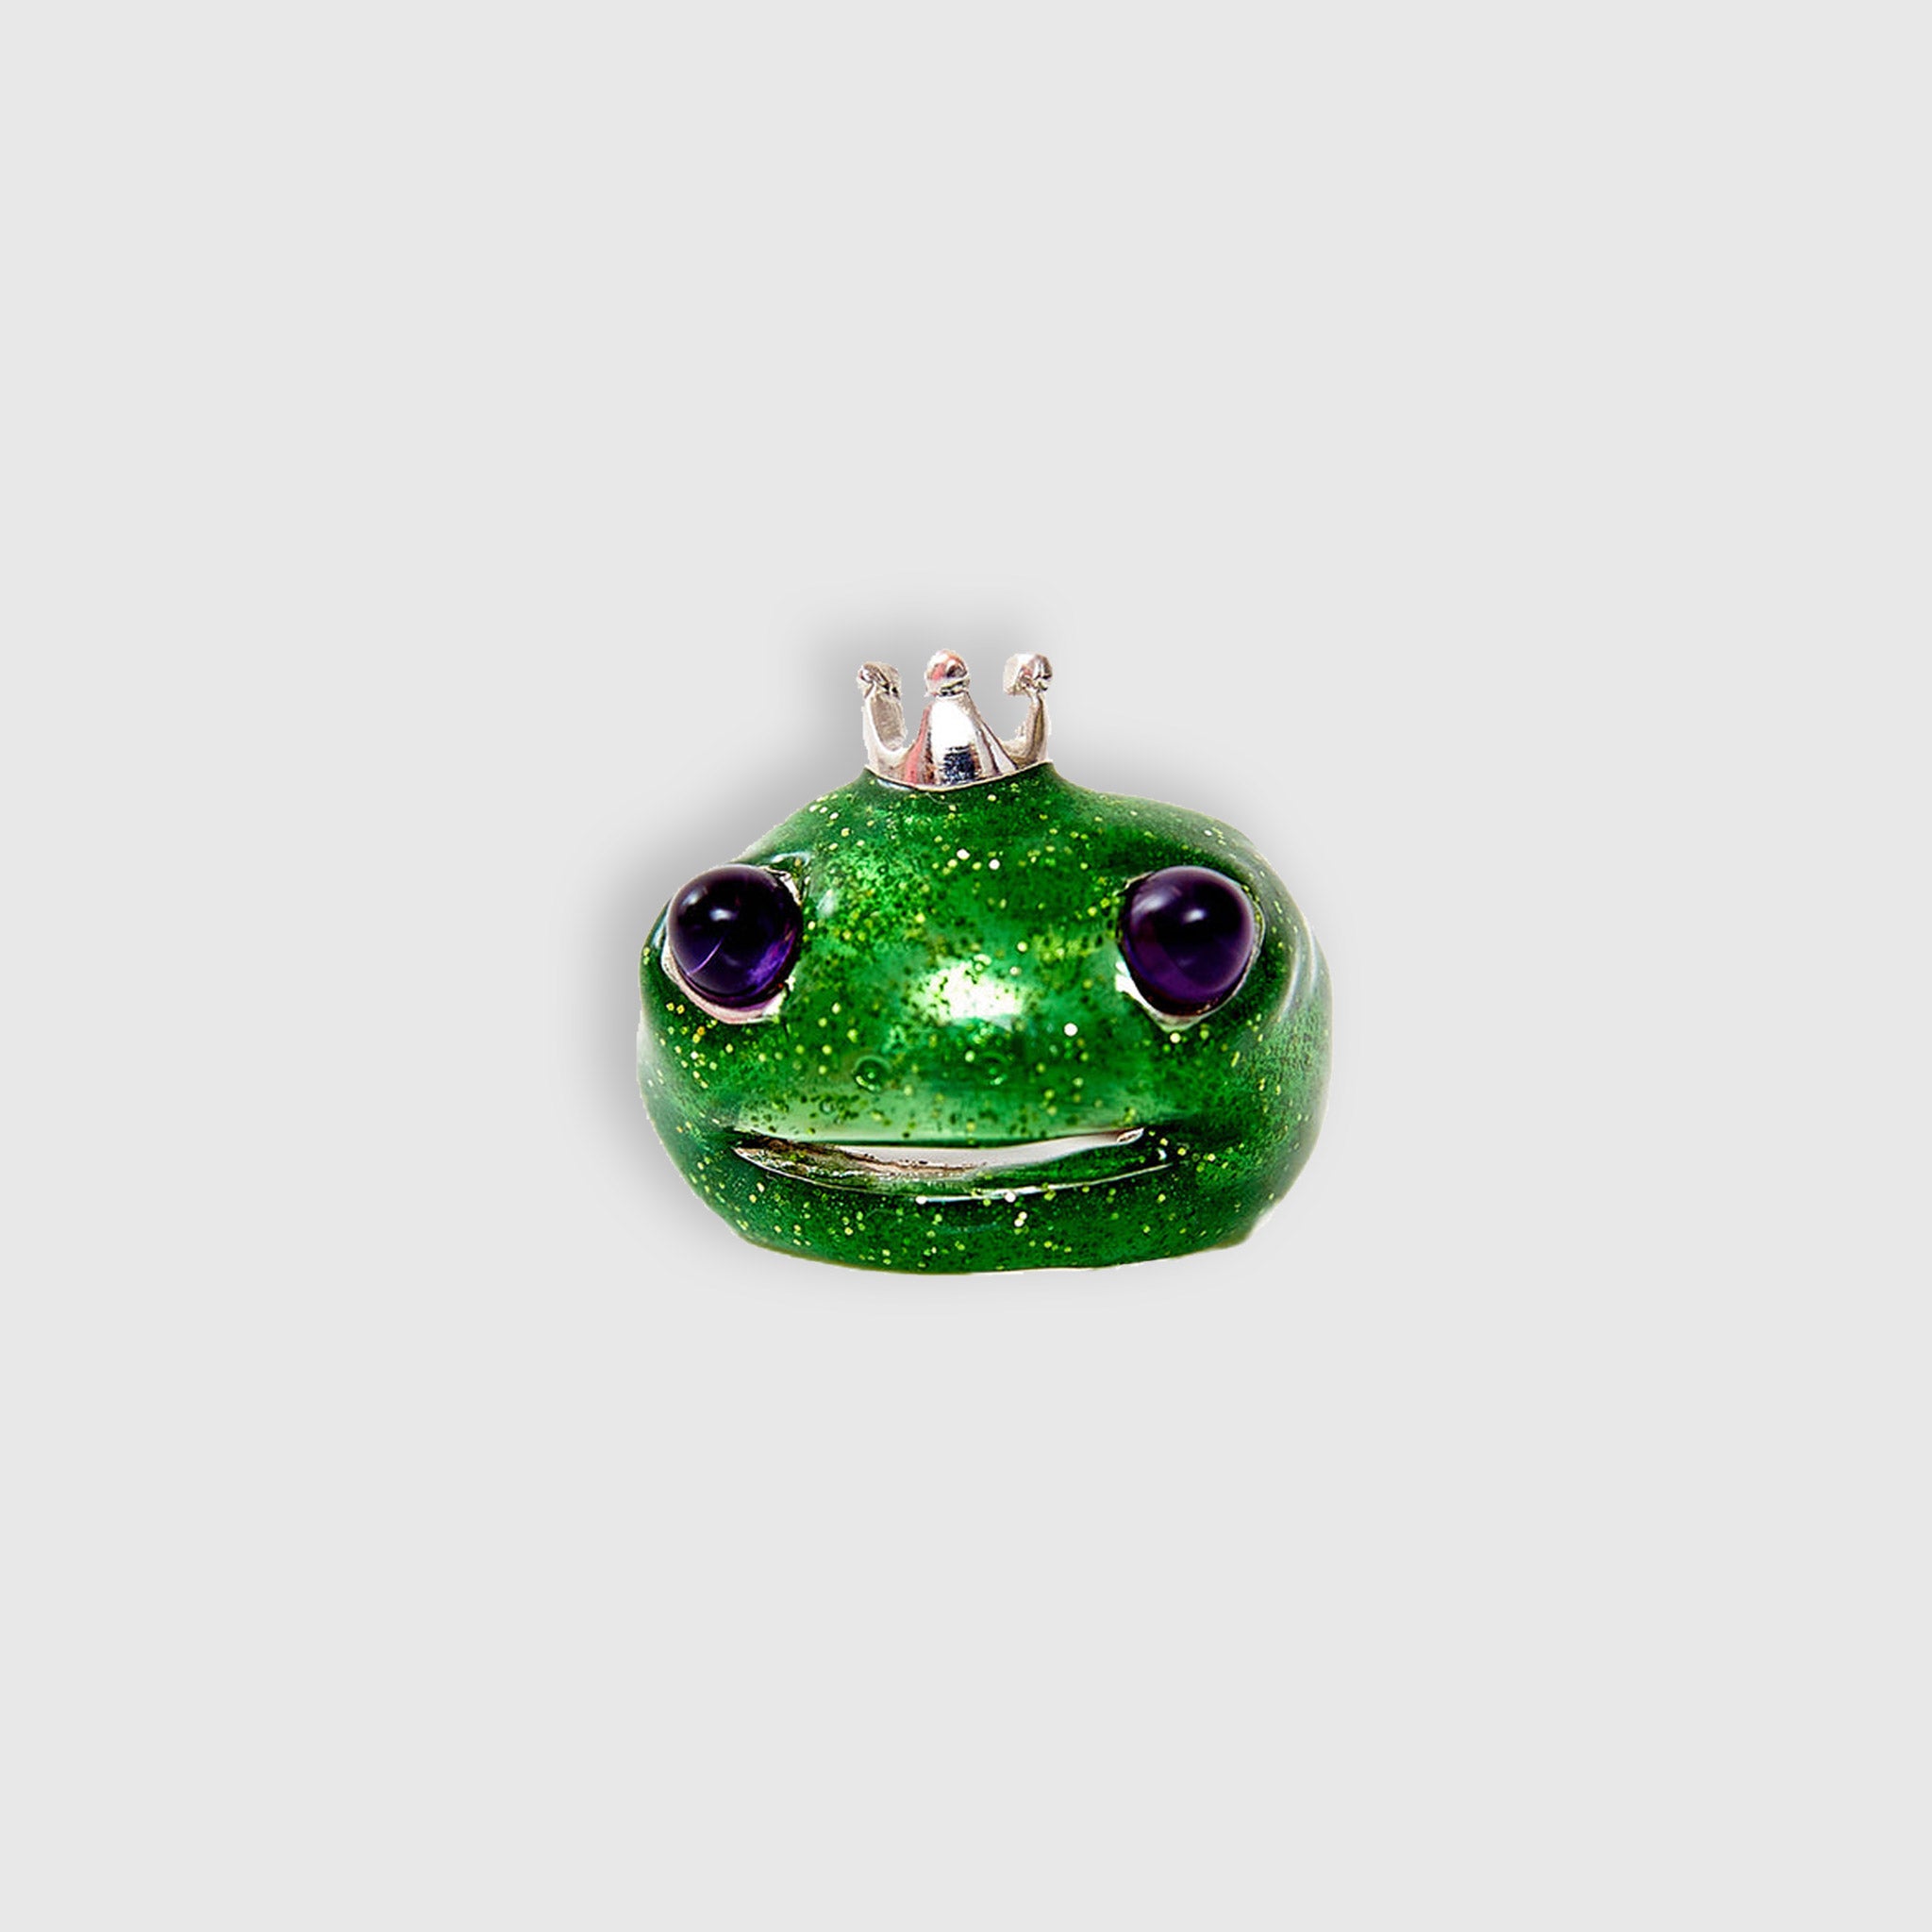 Green glittery Frog Ring by Collina Strada.